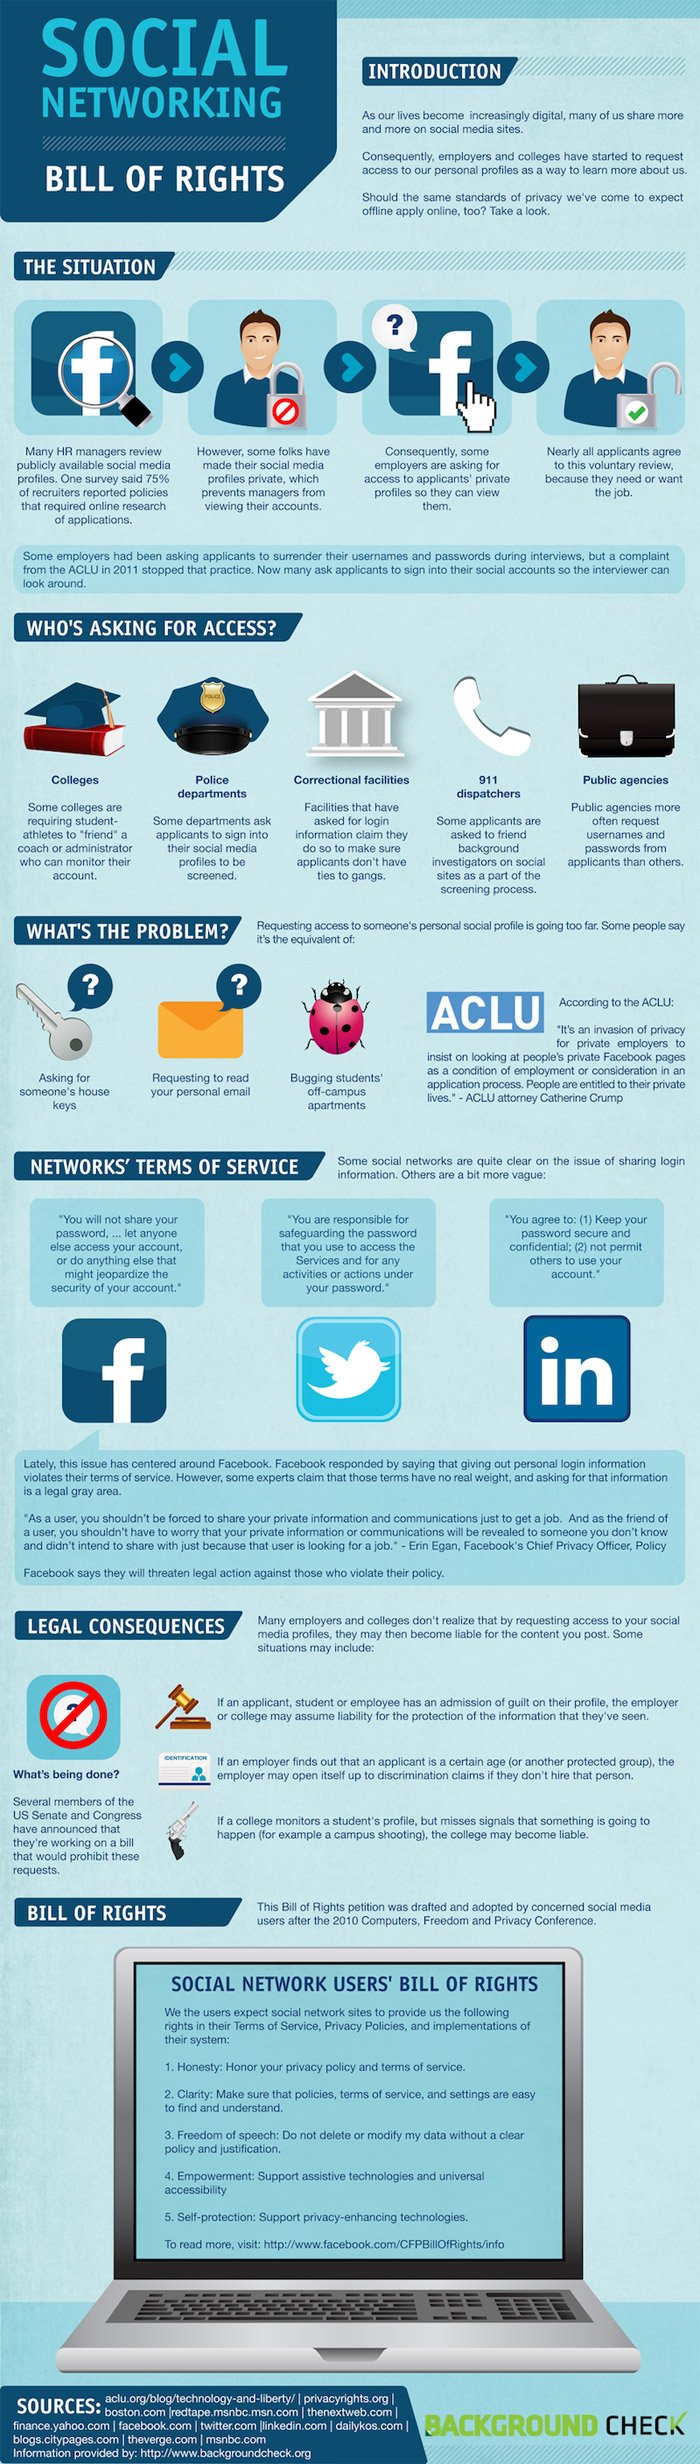 Social Networking Bill Rights Infographic